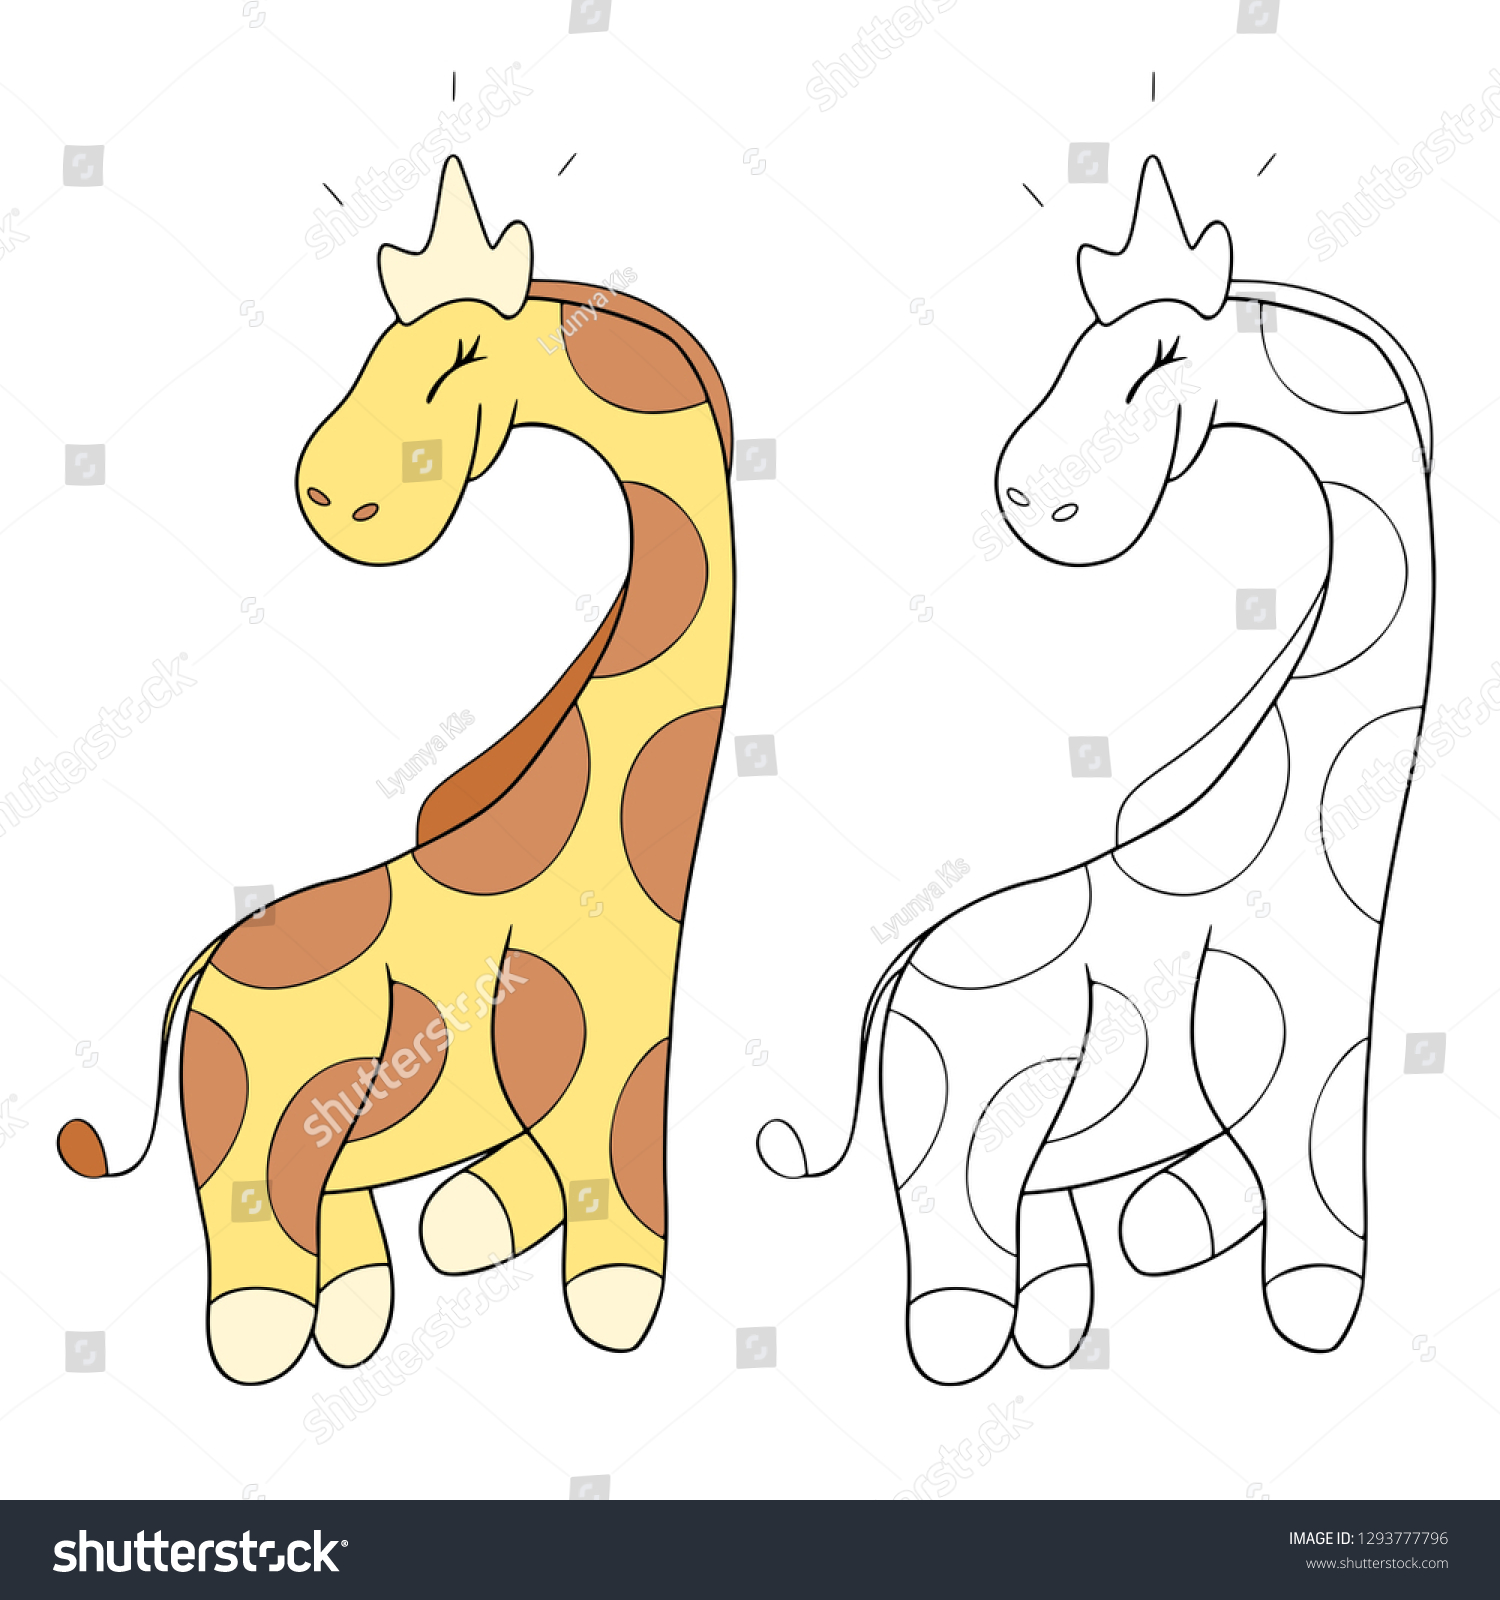 Birthday Giraffee Coloring Pages - 1 : Hence they really enjoy filling